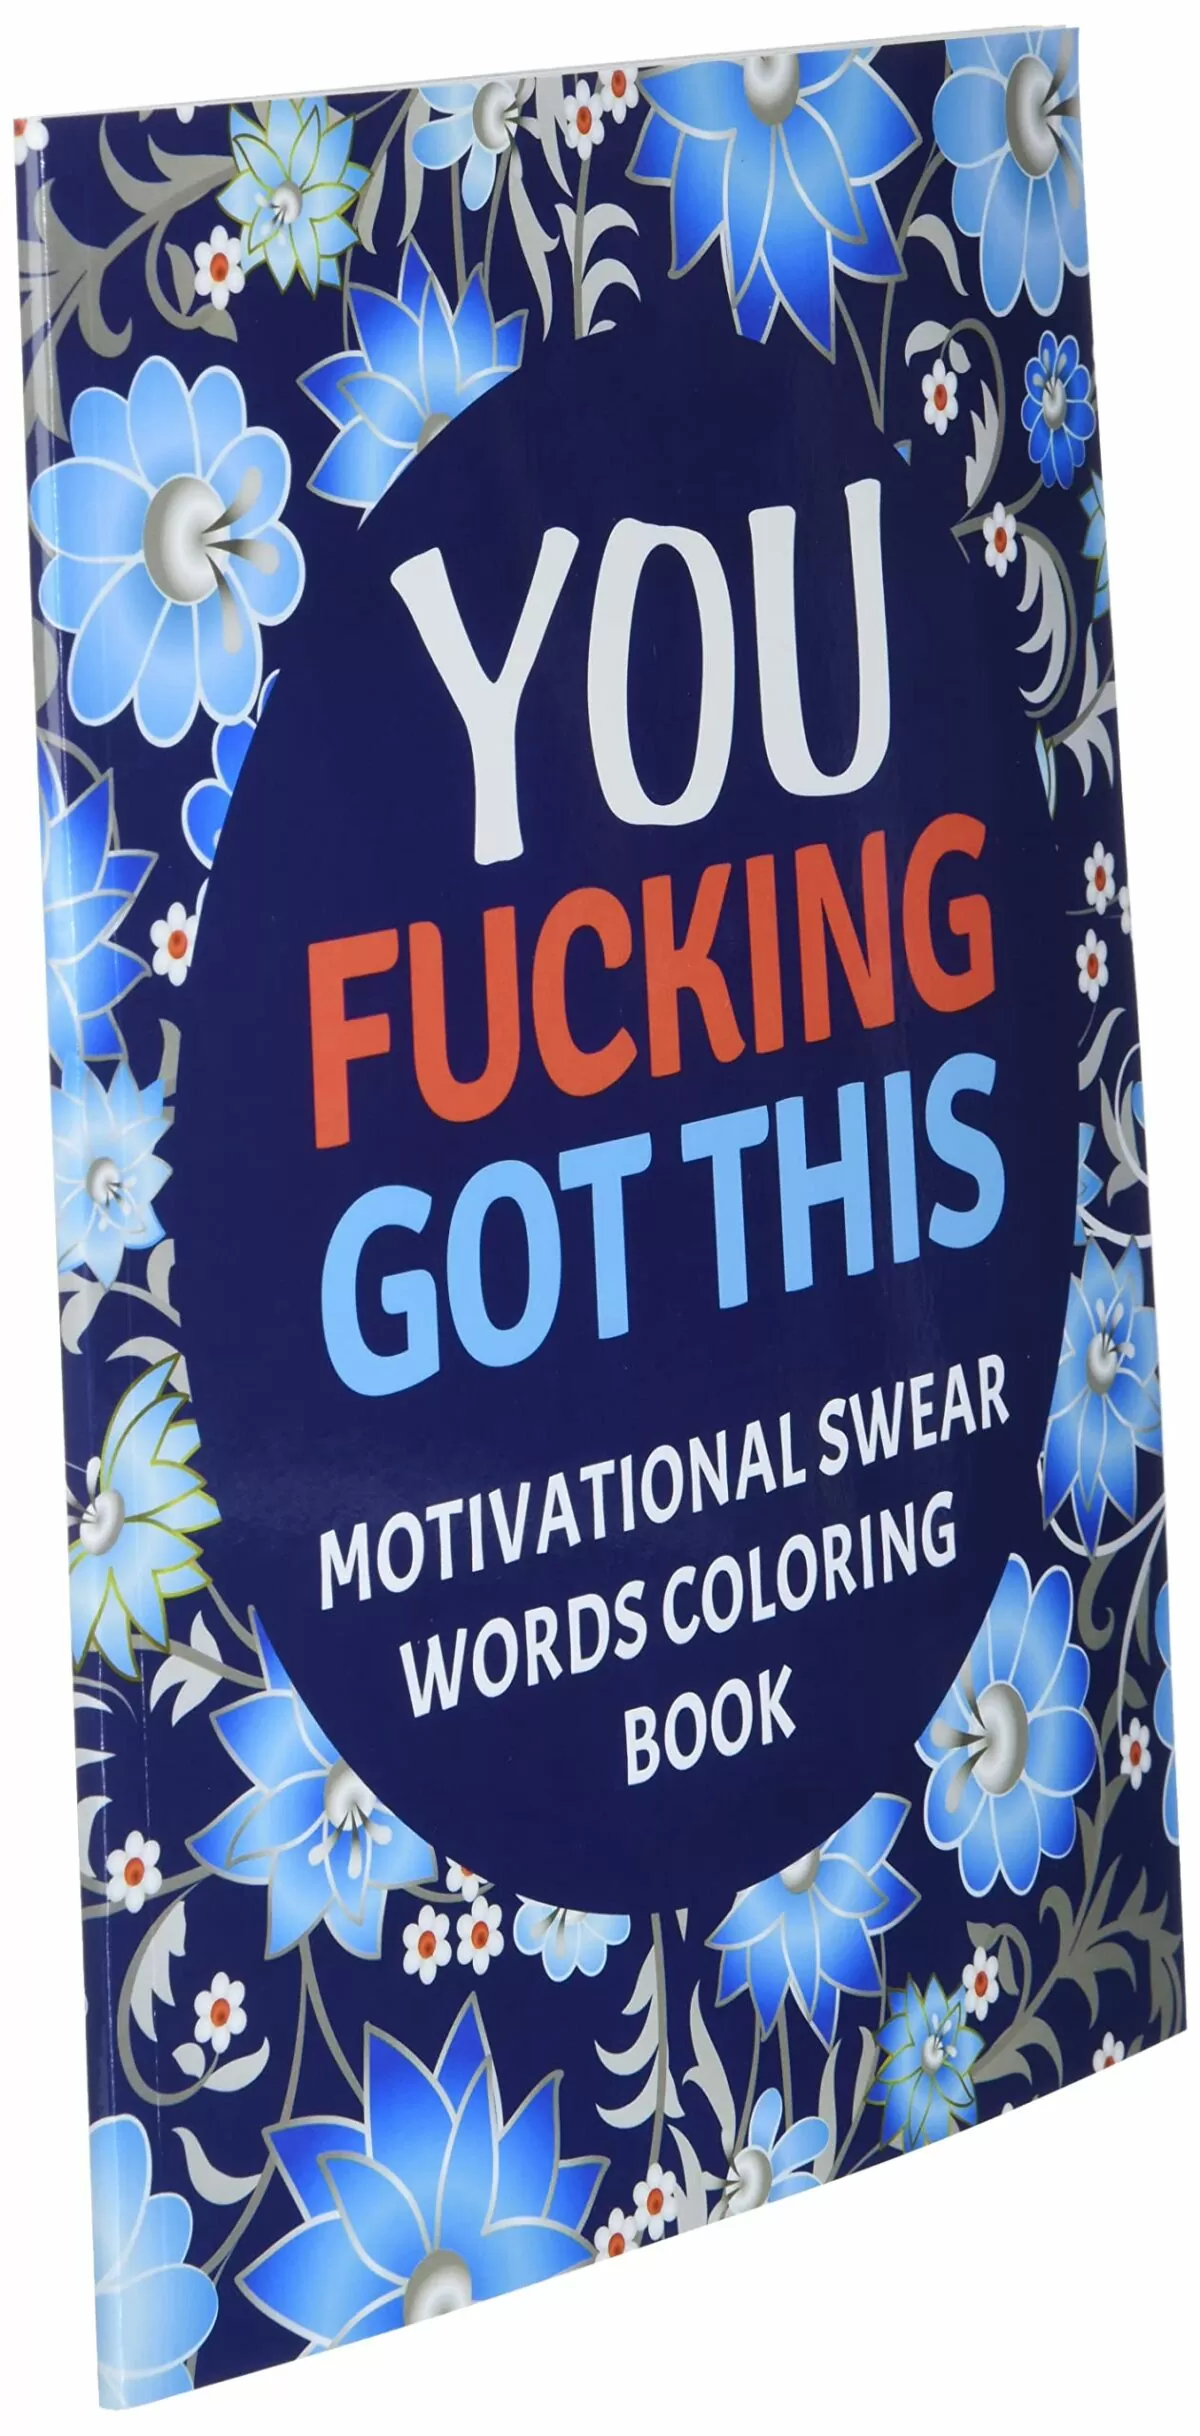 Swearing Coloring Book for Adults: An Adult Coloring Book of 30